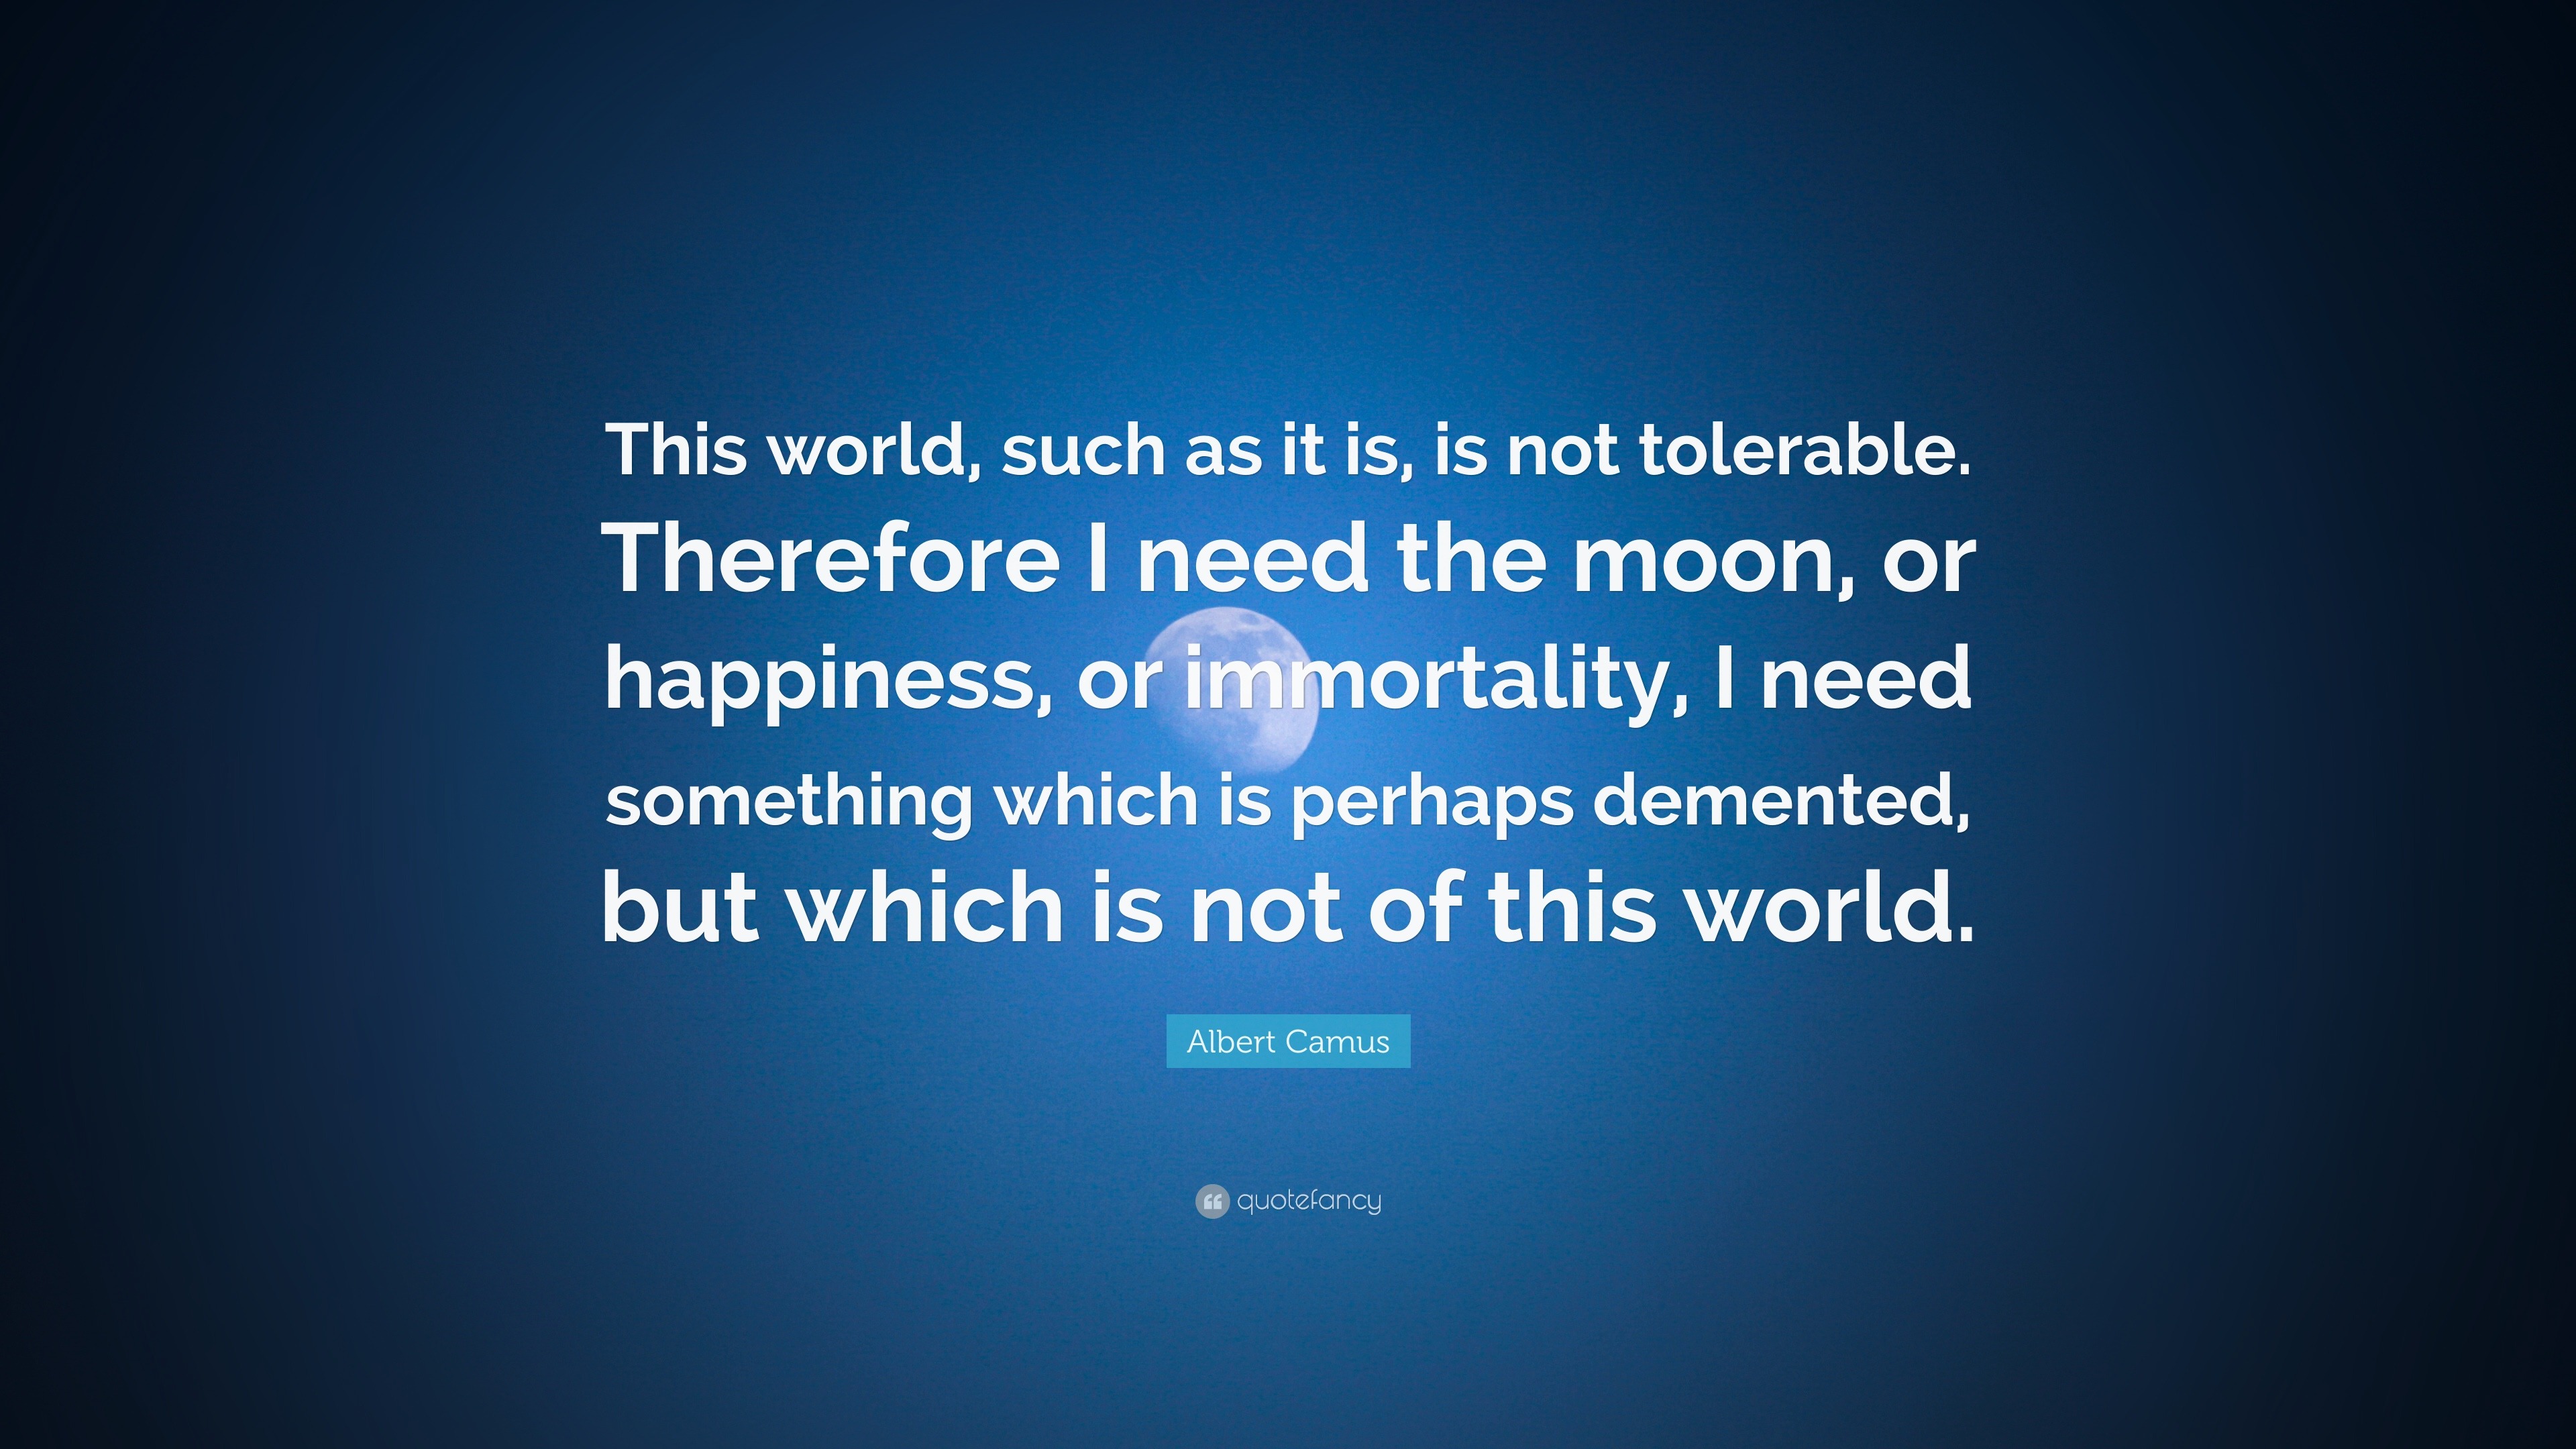 Albert Camus Quote: “This world, such as it is, is not tolerable ...